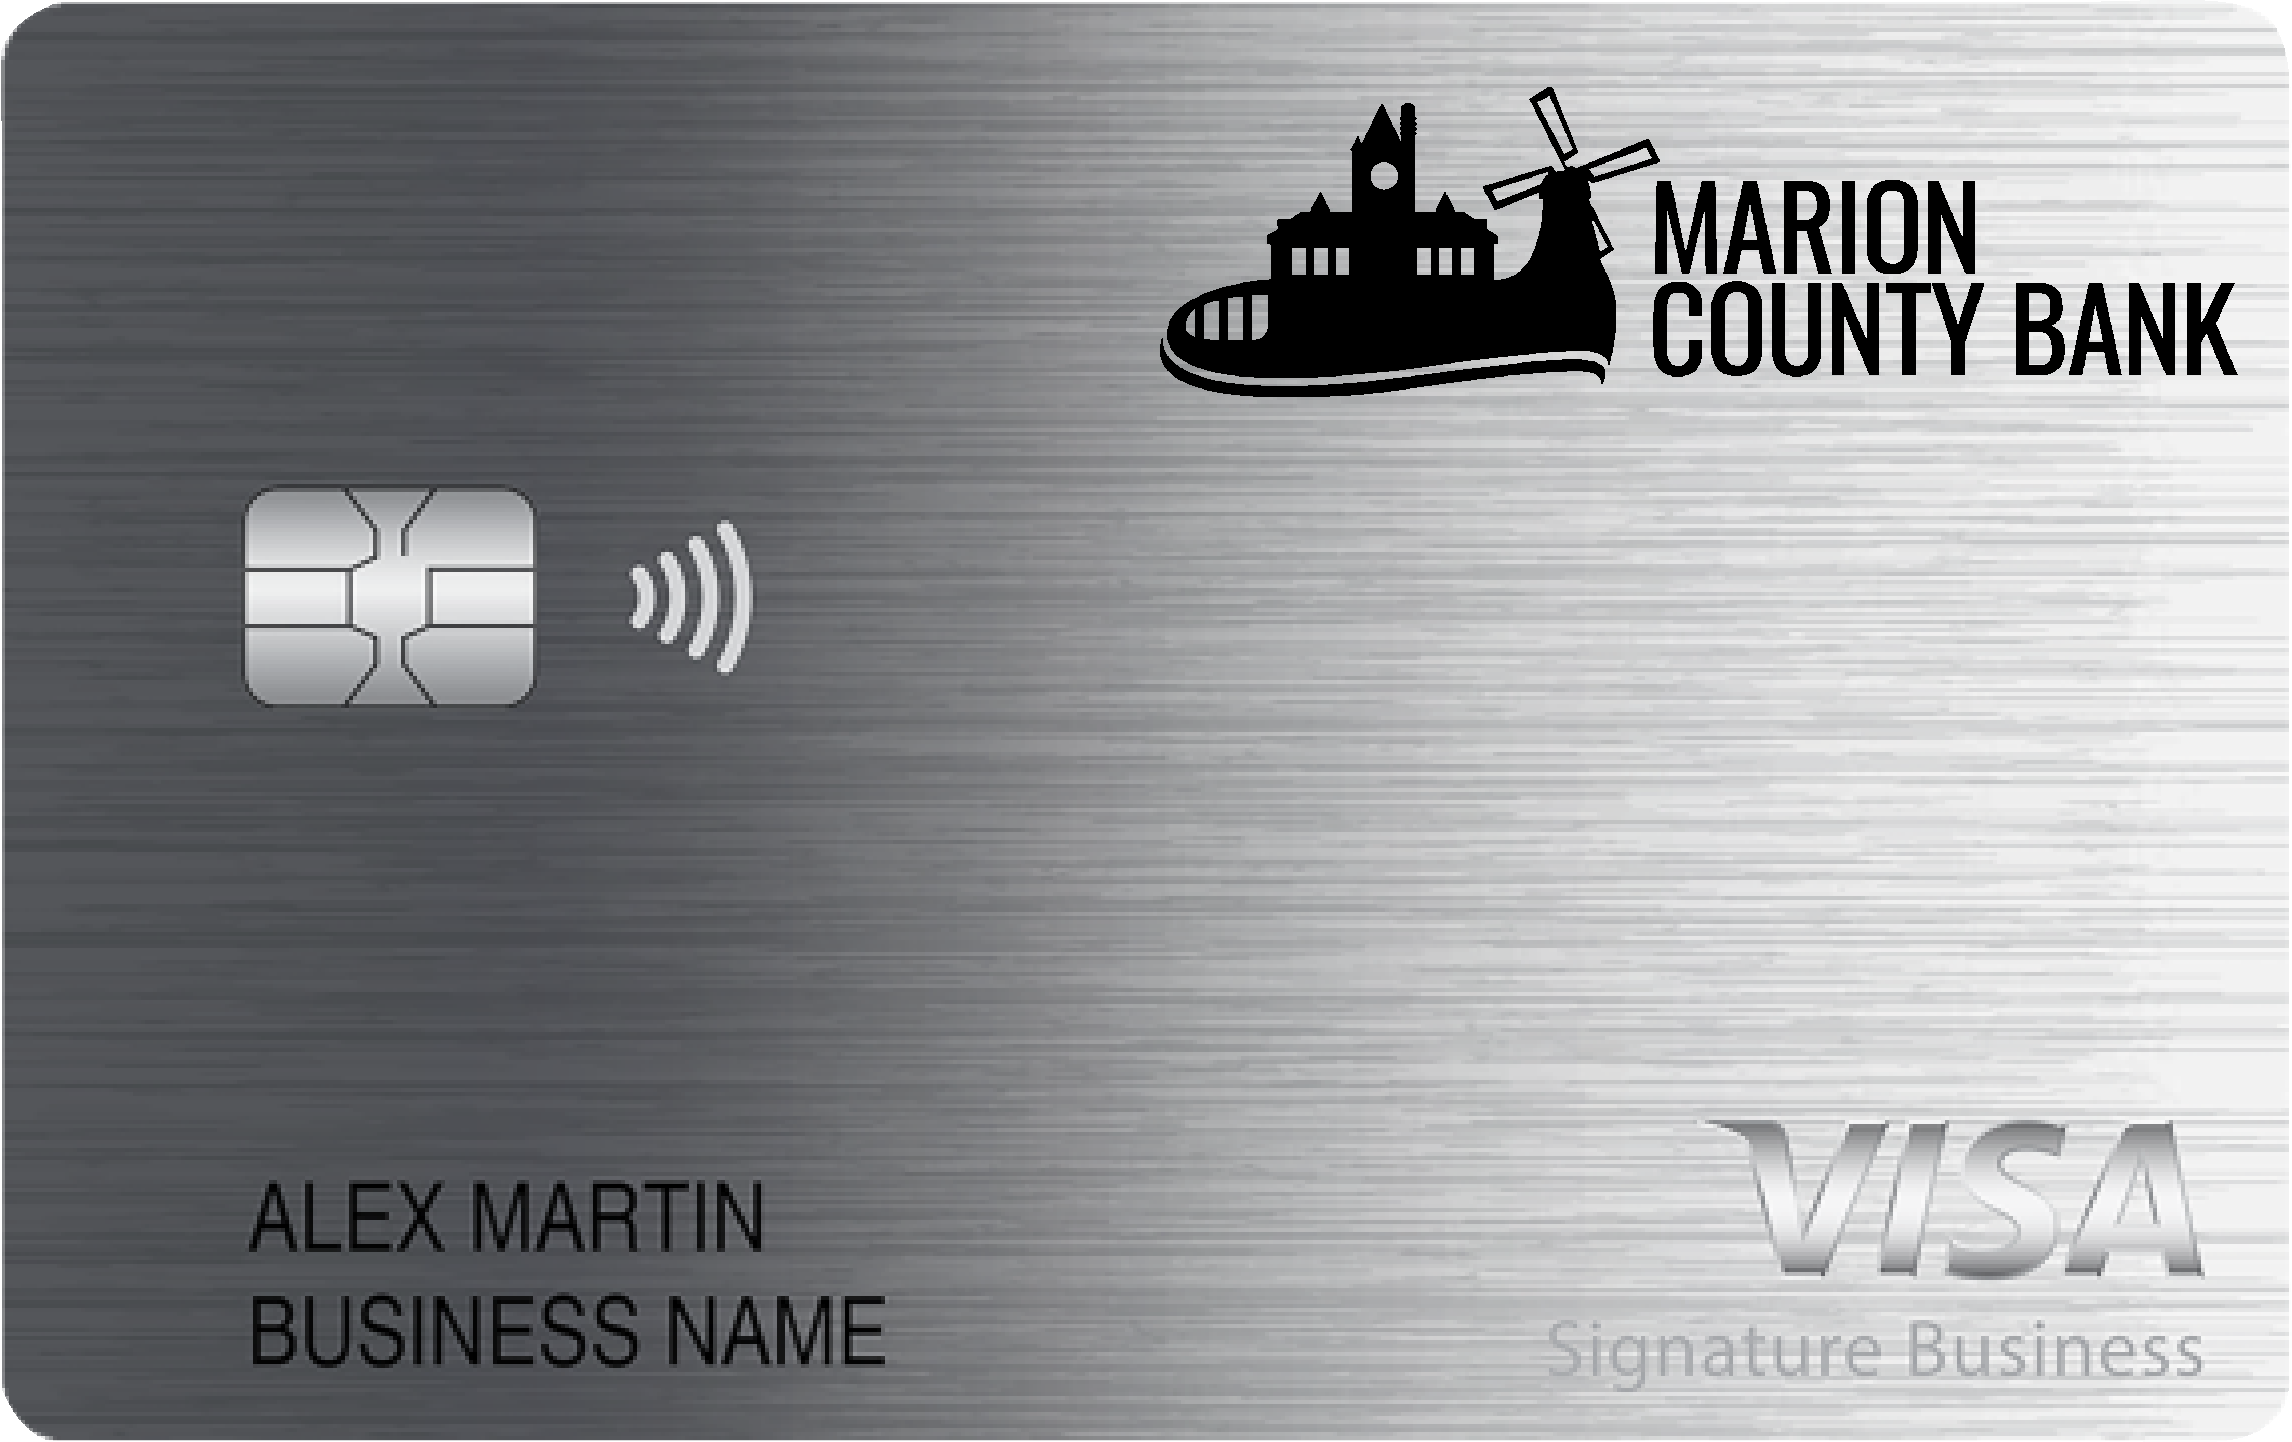 Marion County State Bank Smart Business Rewards Card